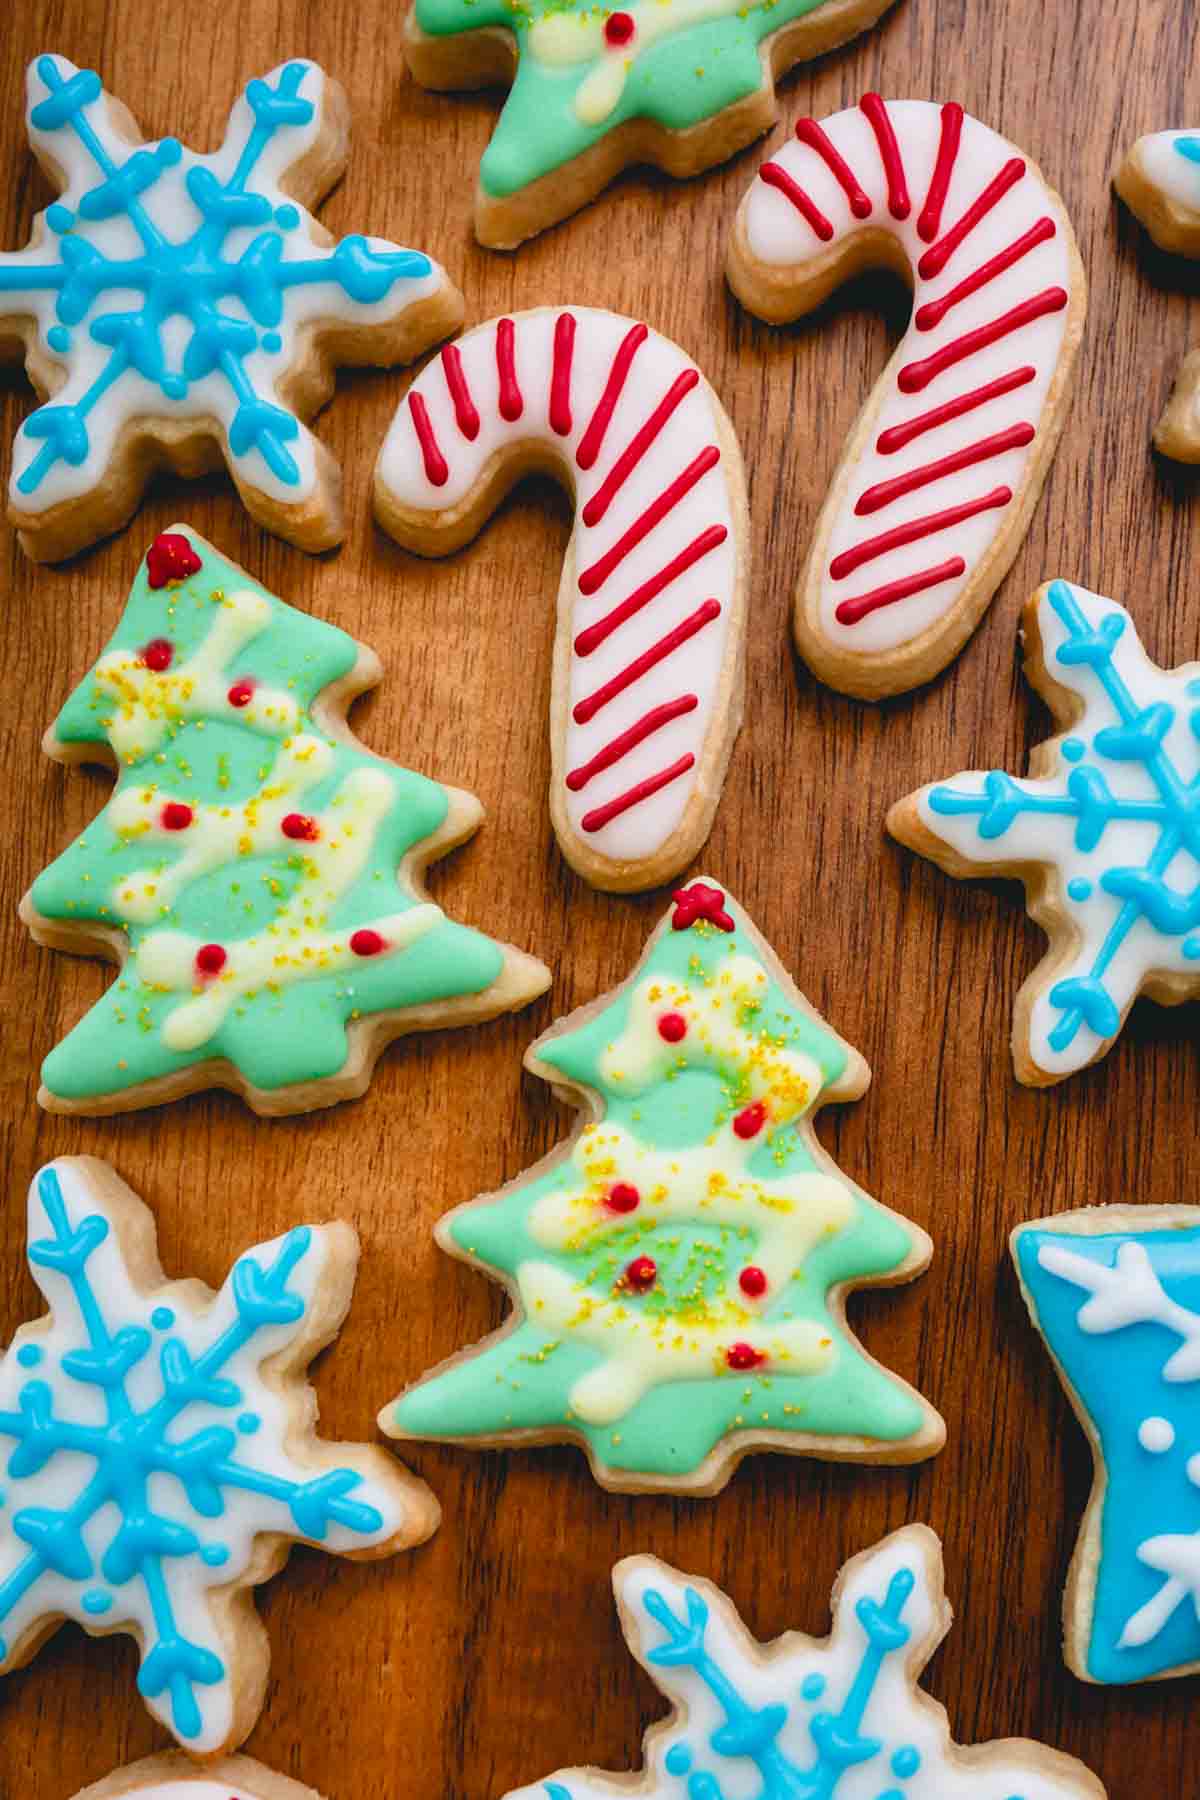 Decorated Christmas sugar cookies in the shape of candy canes, Christmas trees, and snowflakes.